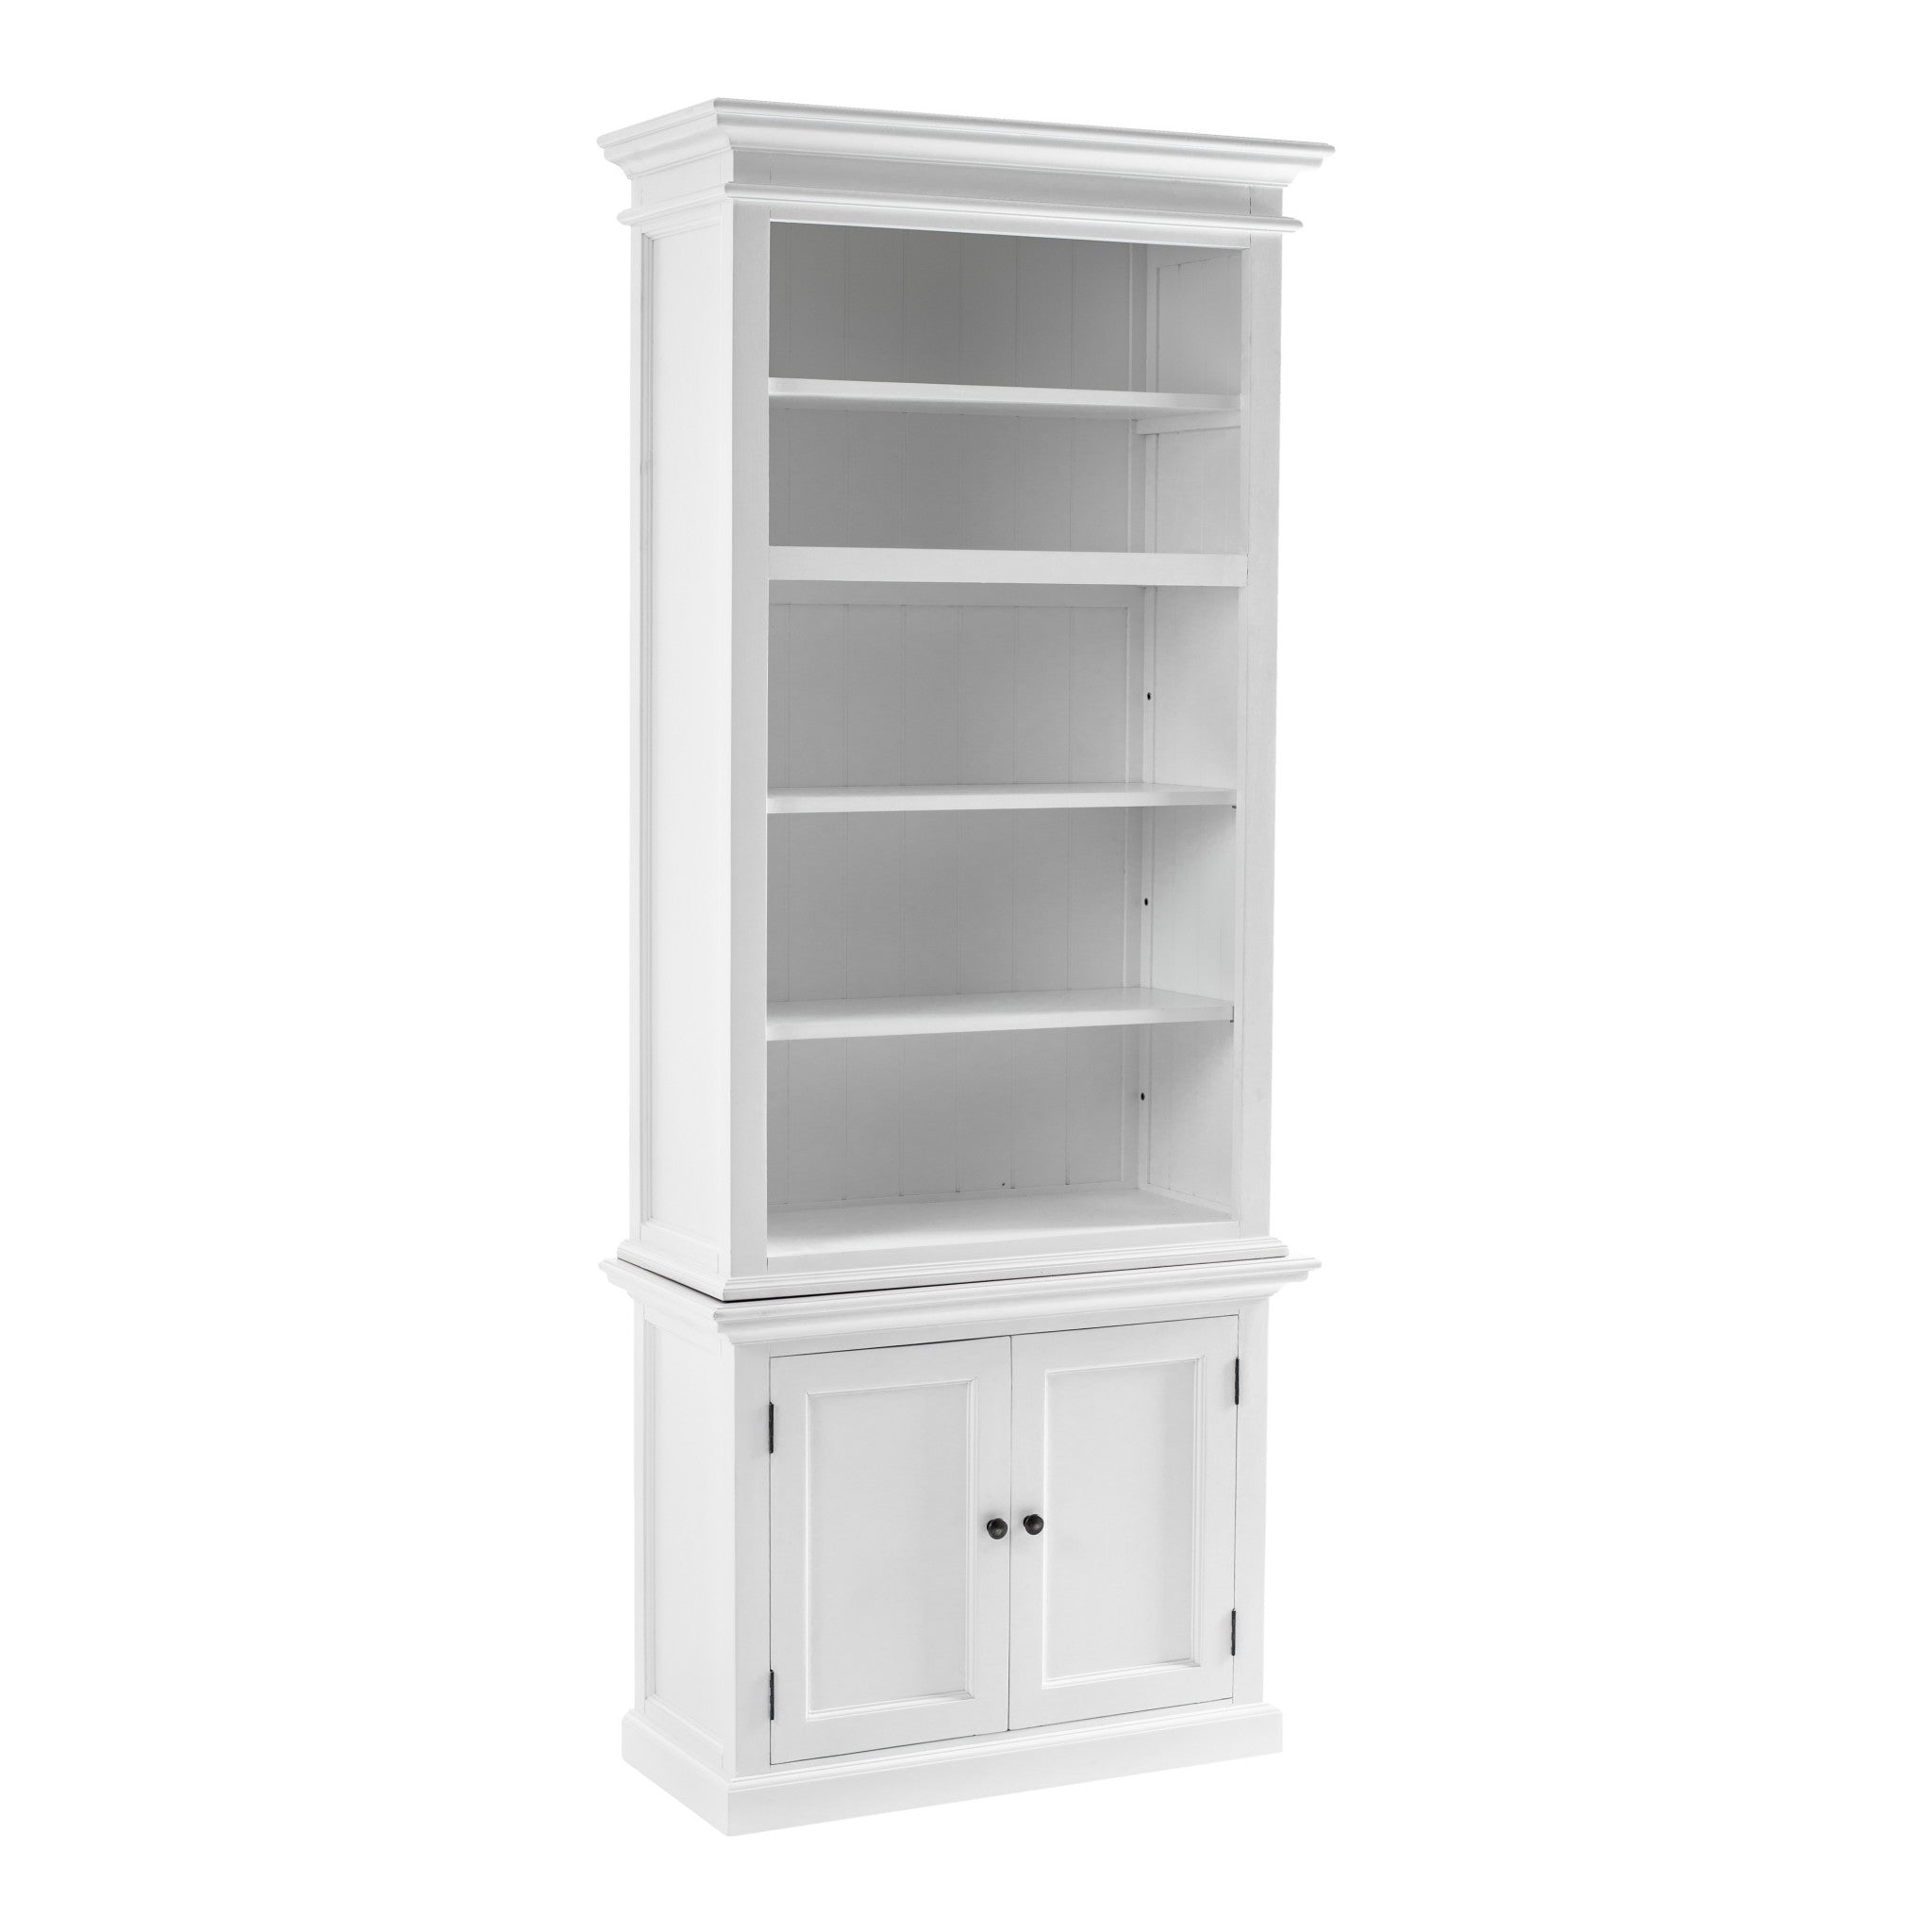 87" White Solid Wood Adjustable Four Tier Bookcase